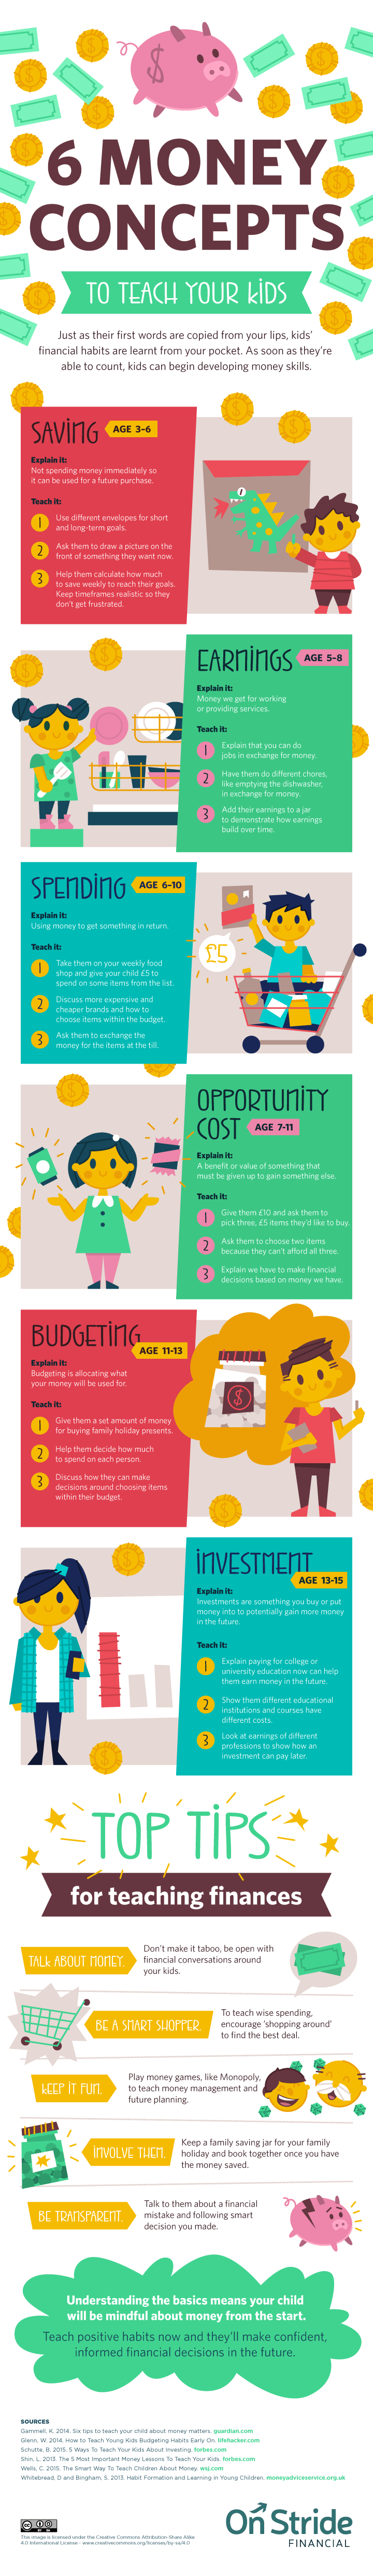 6 Money Concepts to Teach Your Kids Infographic